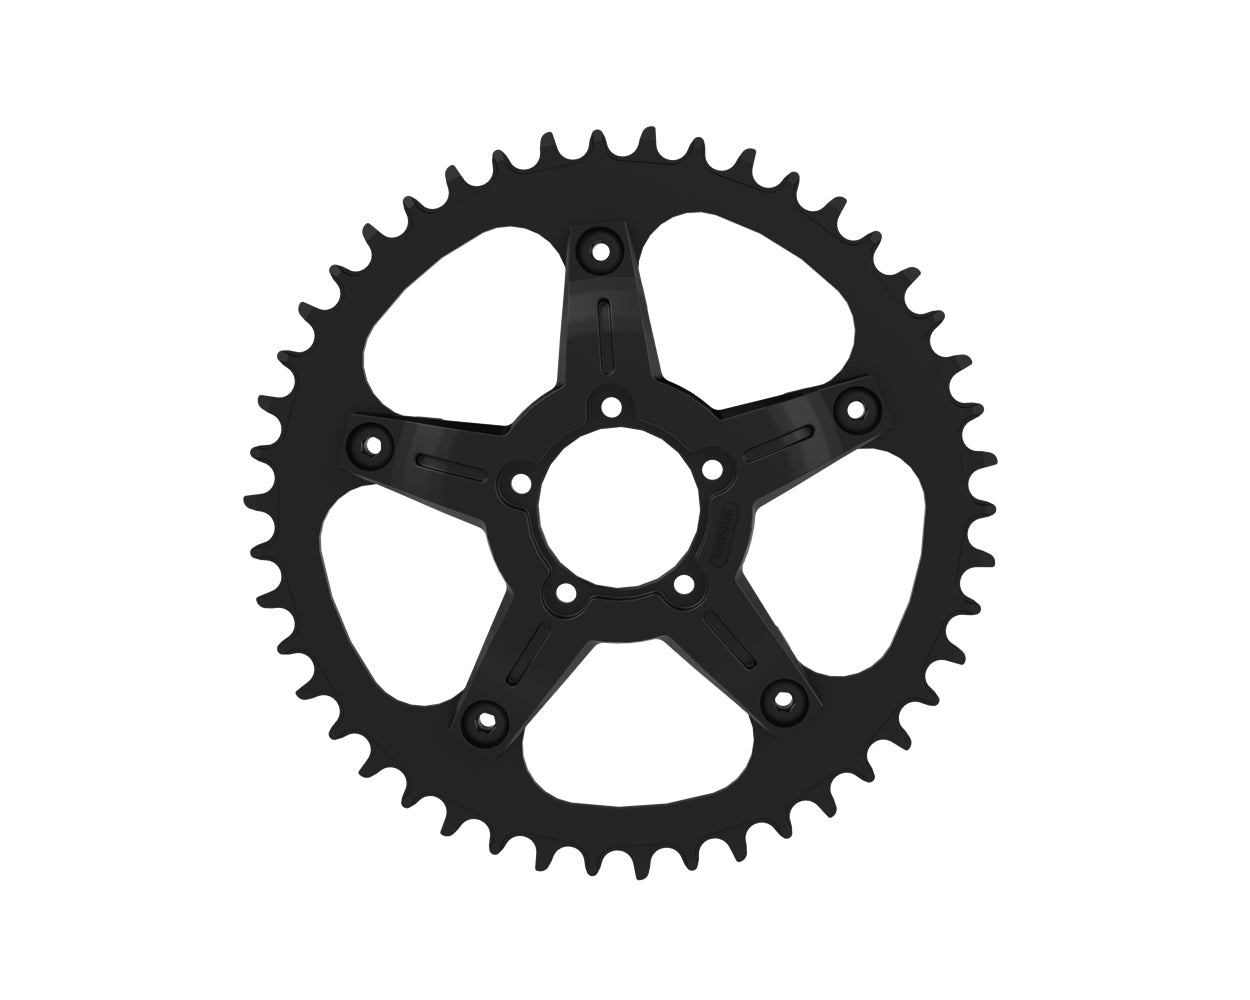 BAFANG Narrow Wide 46T Chain Wheel Chainring for M225/M325 Mid Motor